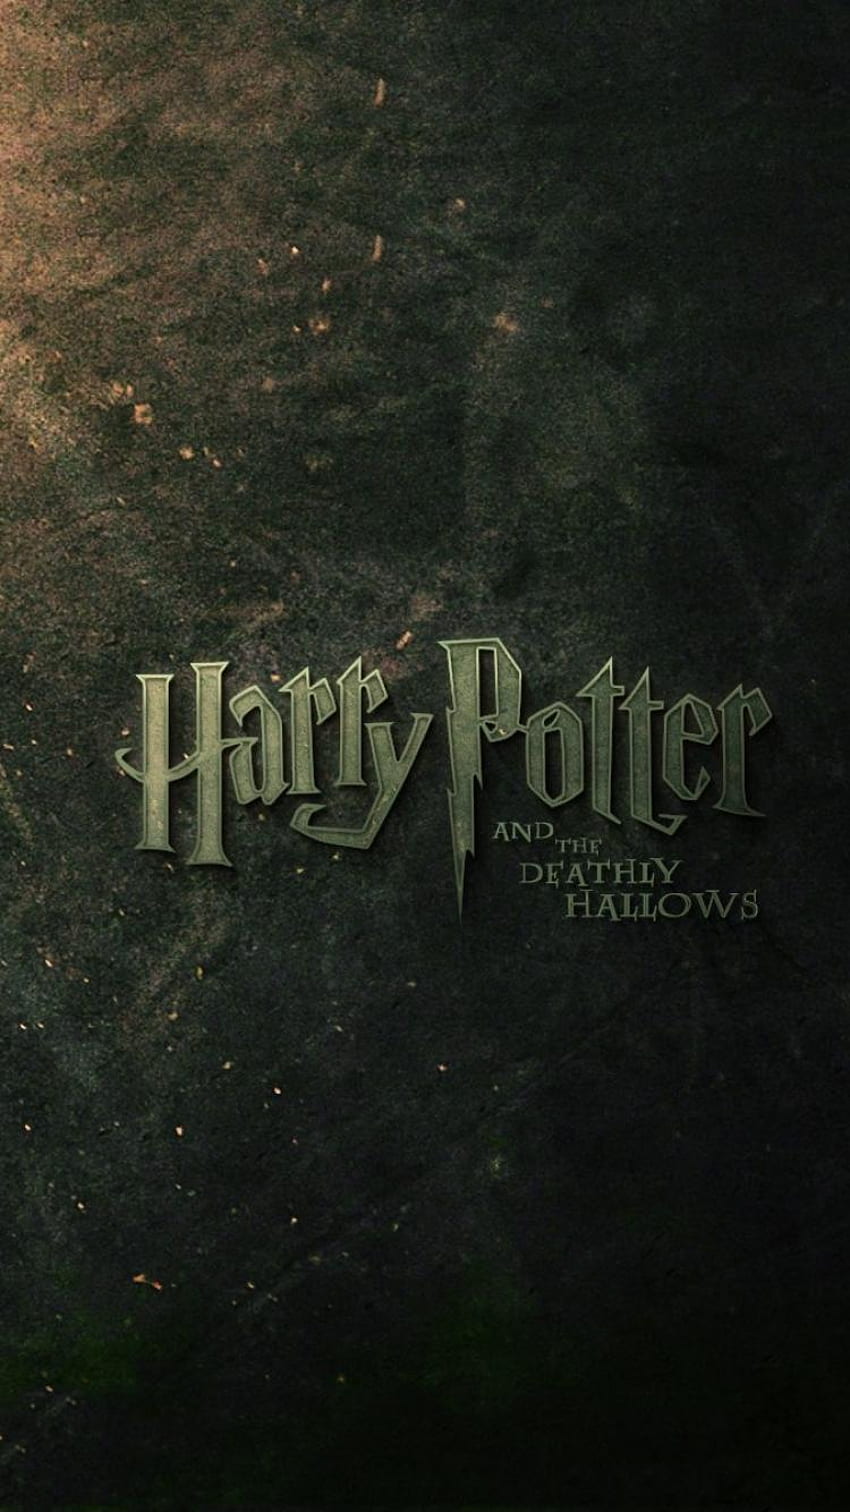 Harry Potter Wallpapers and Backgrounds - WallpaperCG